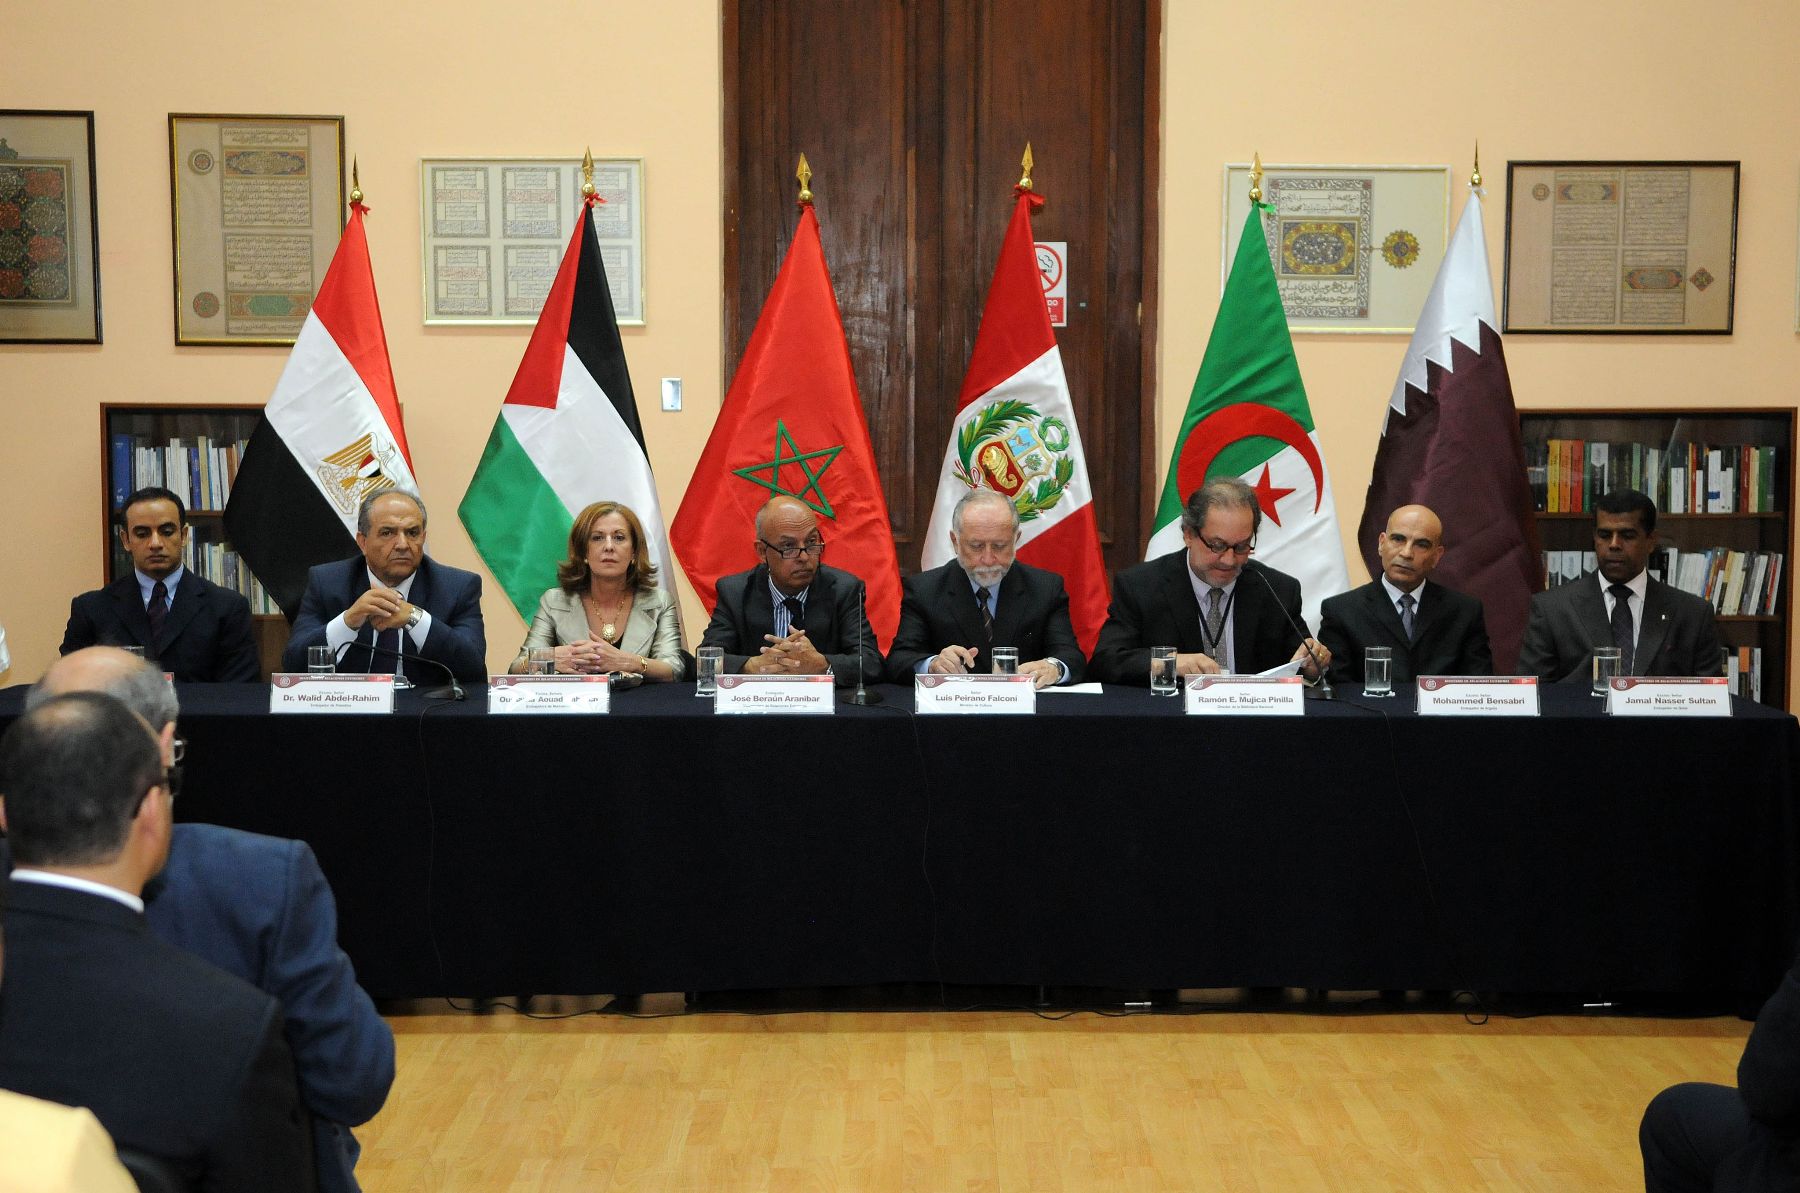 Inauguration ceremony of First Arab Culture Room in Peru at Lima